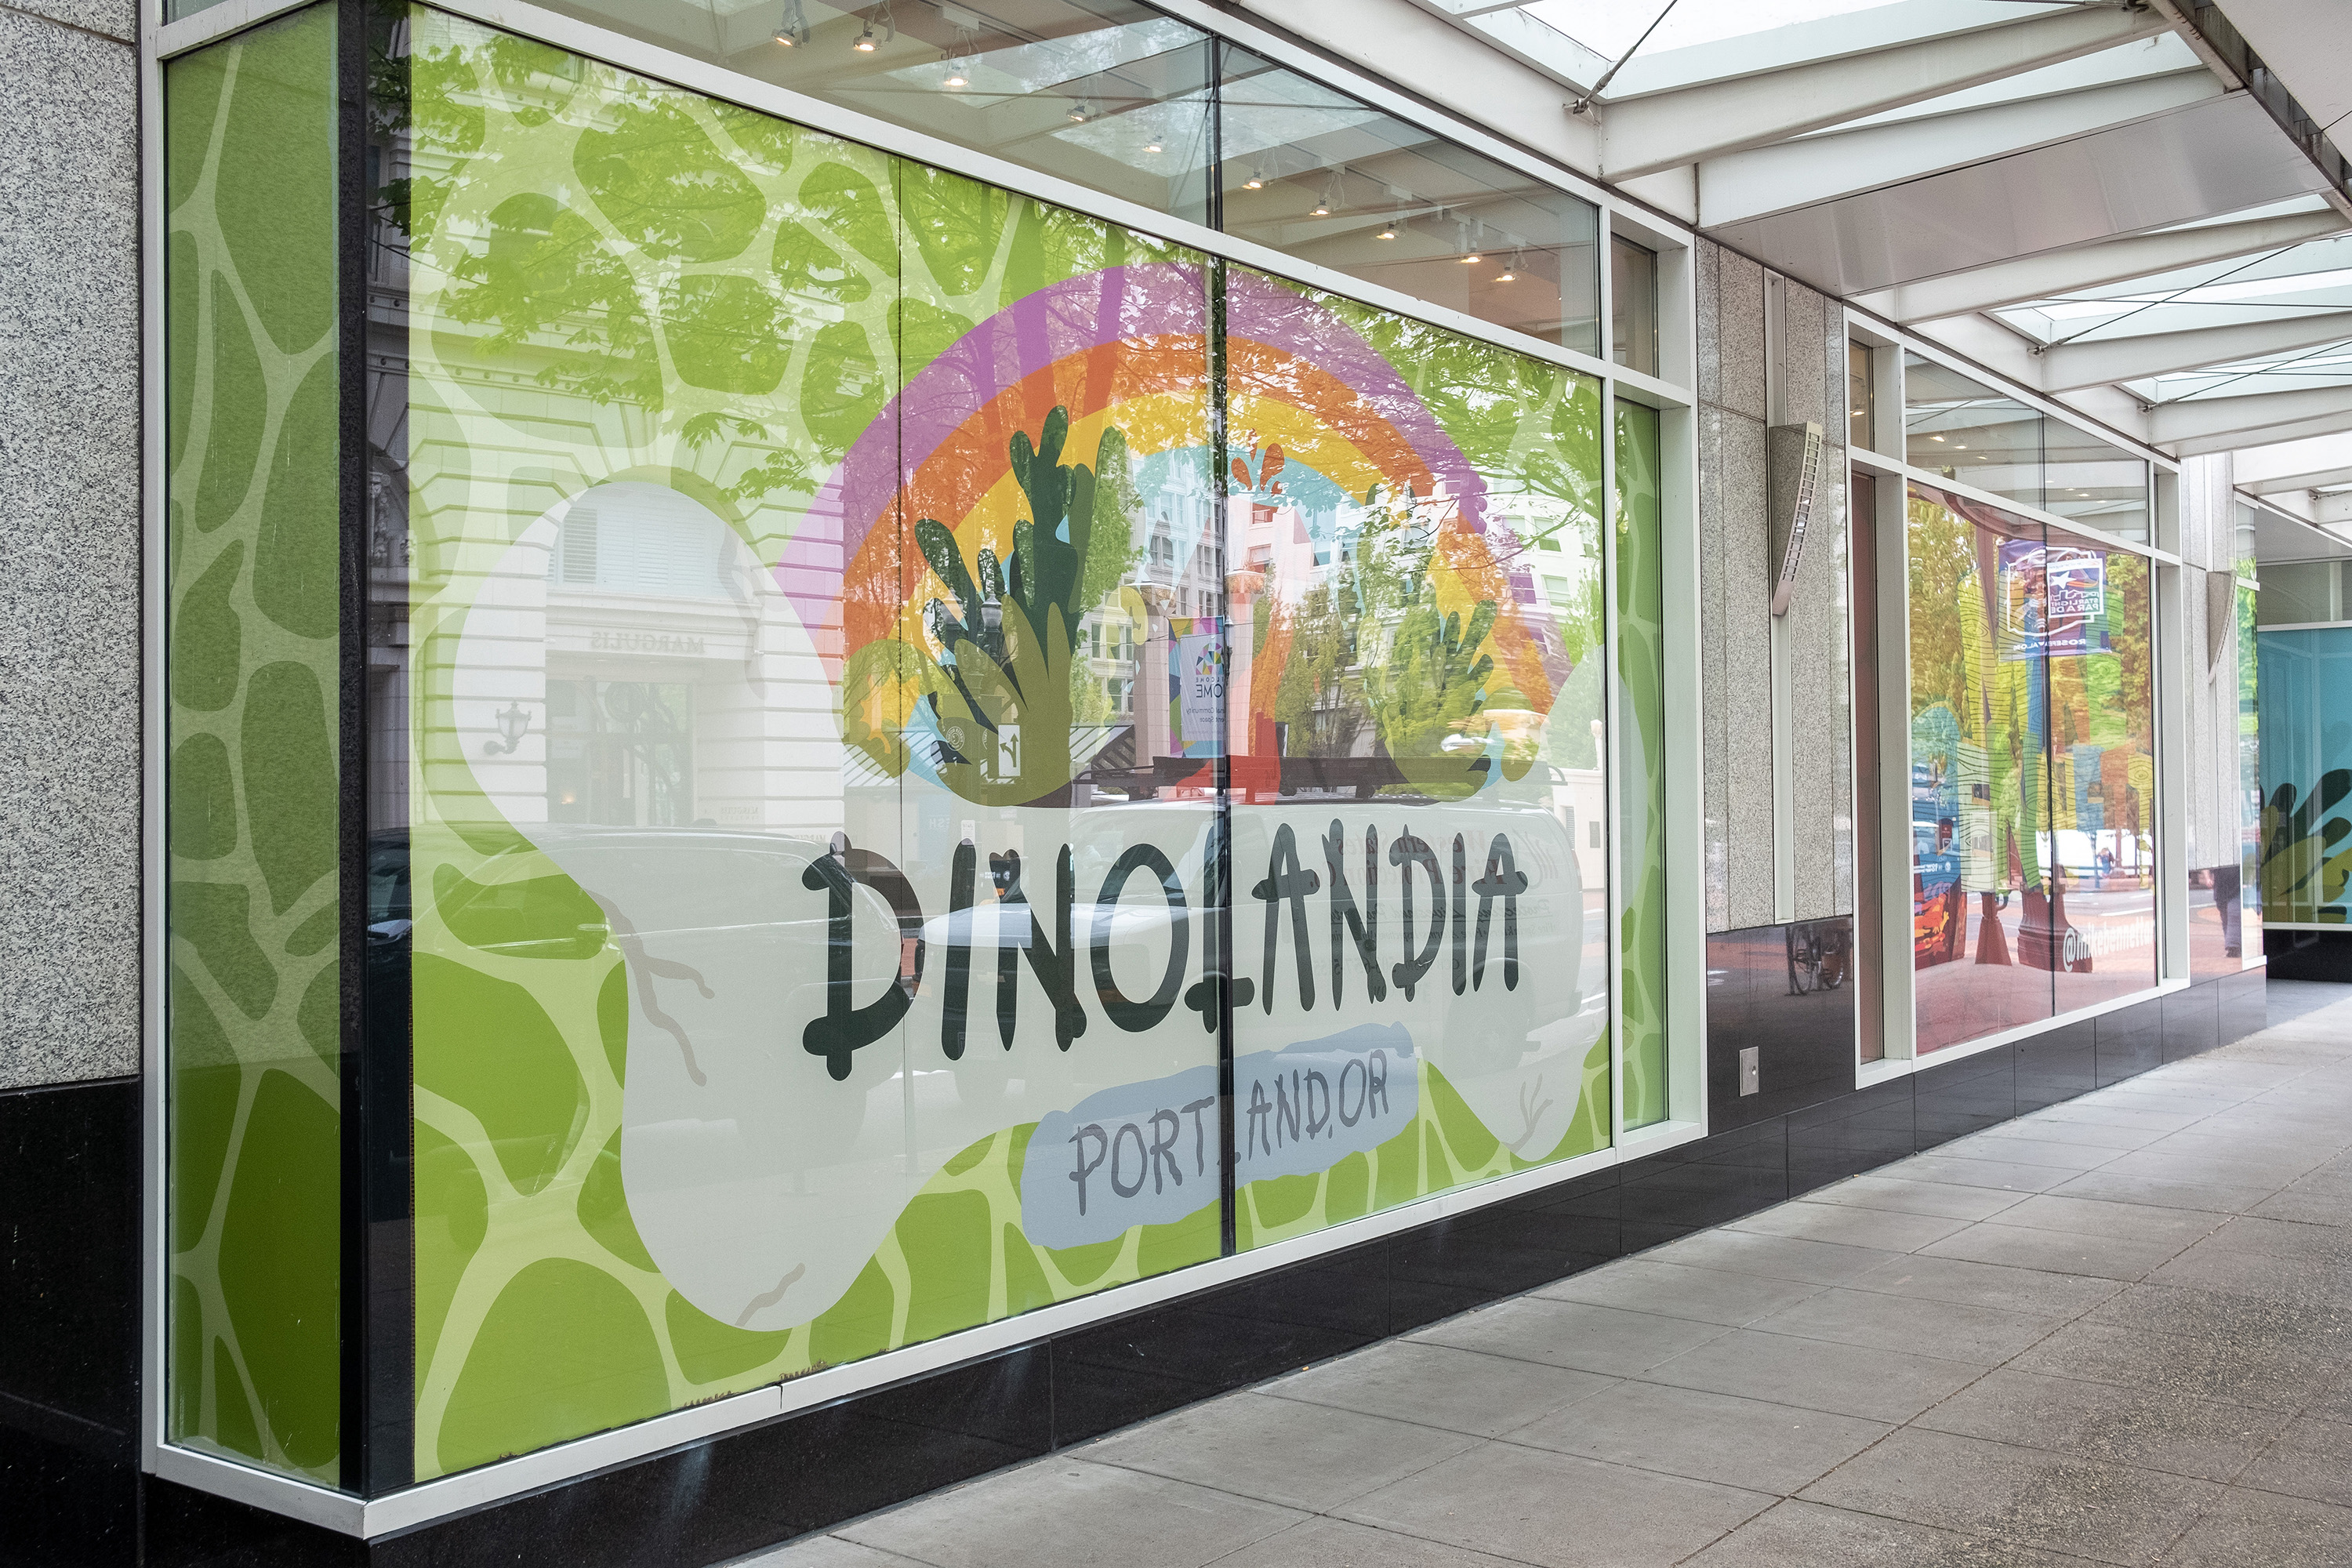 Dinolandia window graphics produced by Infinity Images.